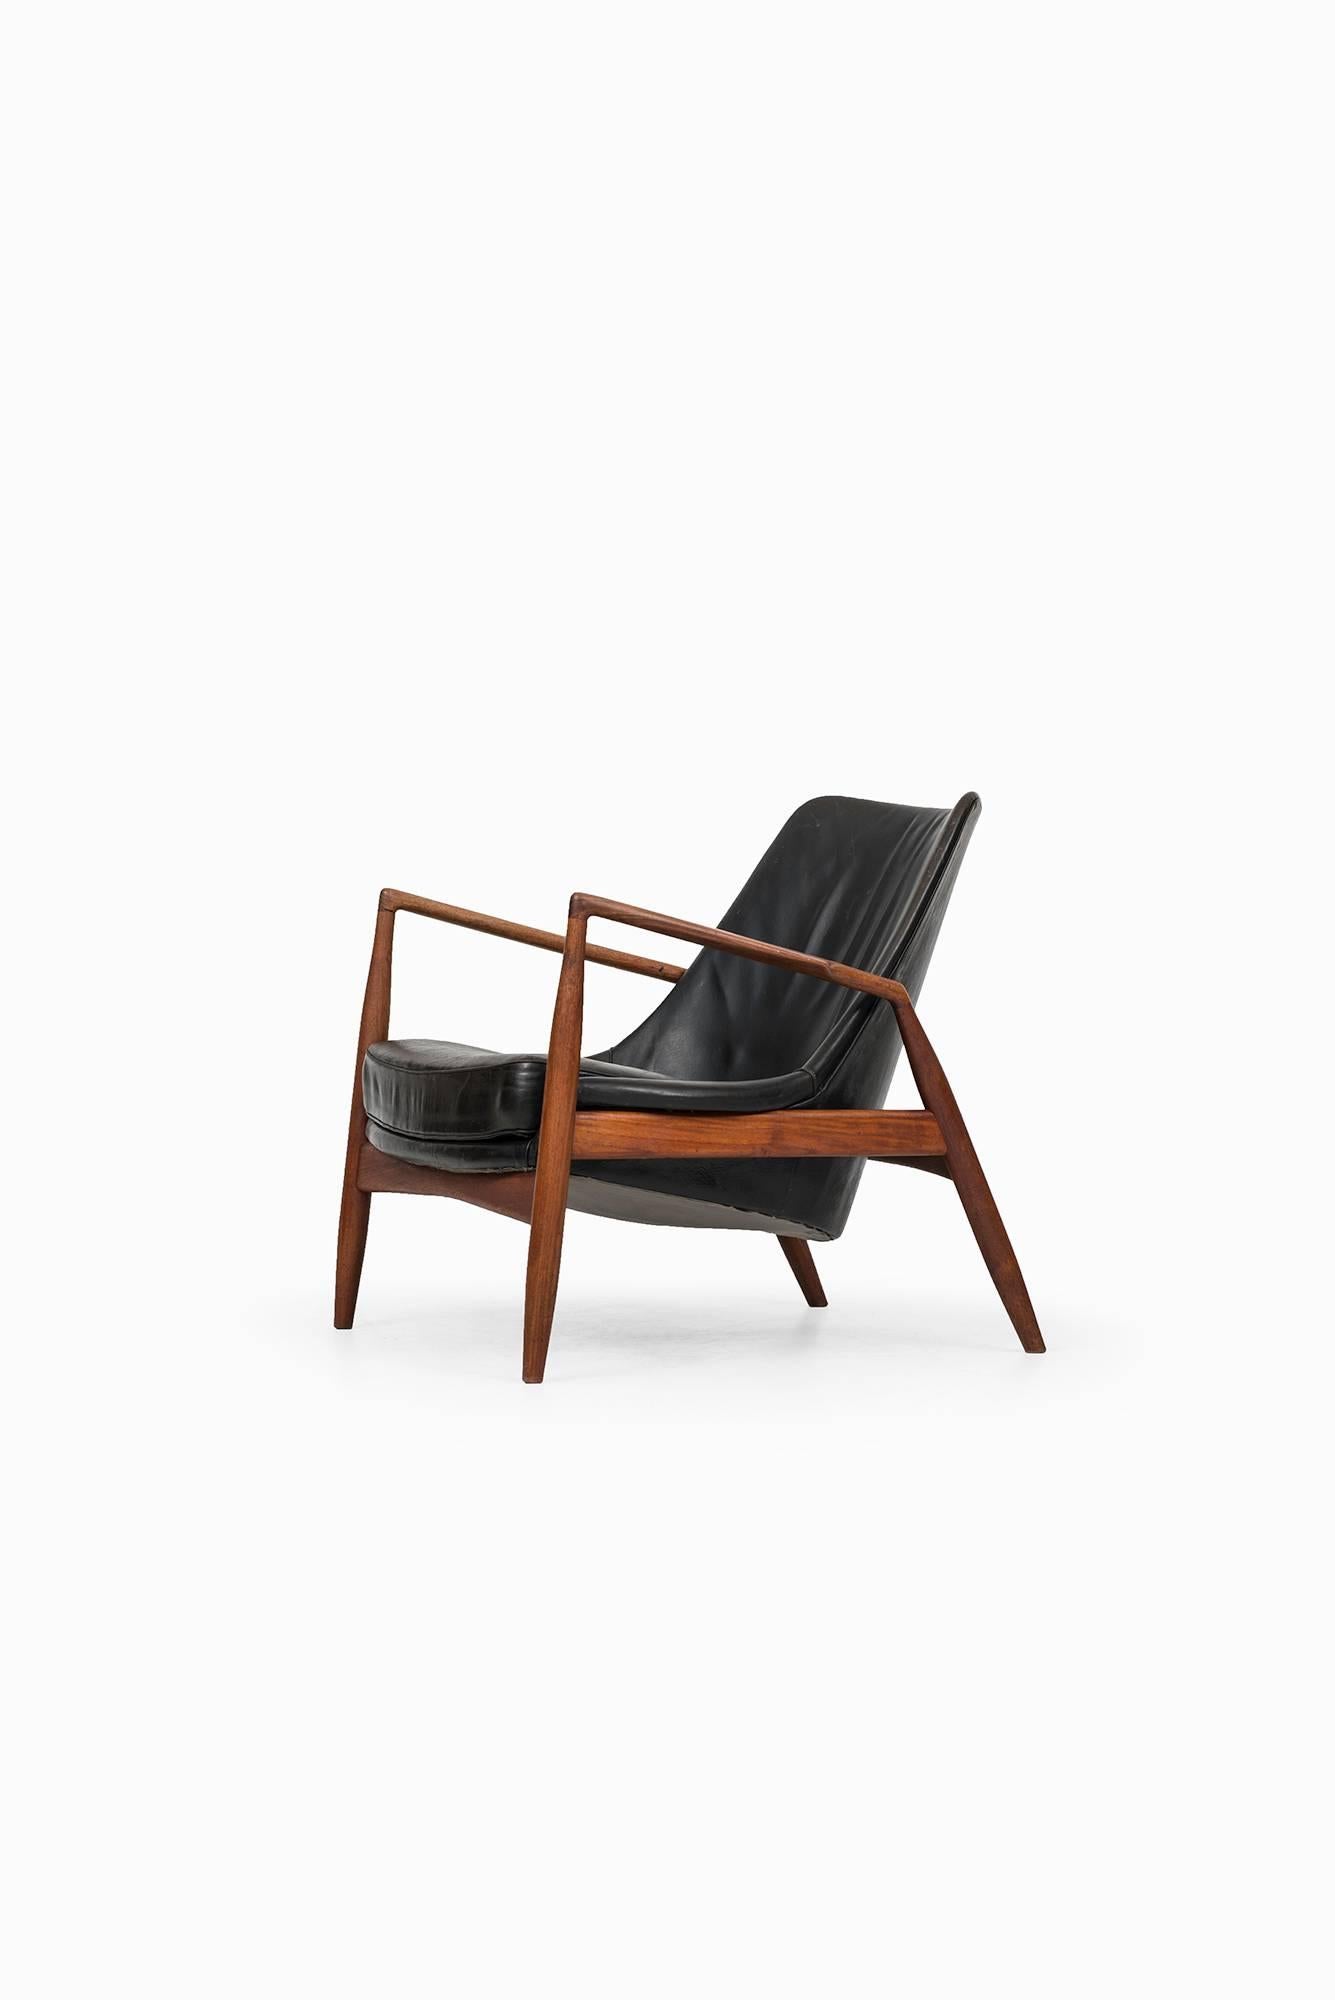 Rare easy chair model Sälen/Seal designed by Ib Kofod-Larsen. Produced by OPE in Sweden.